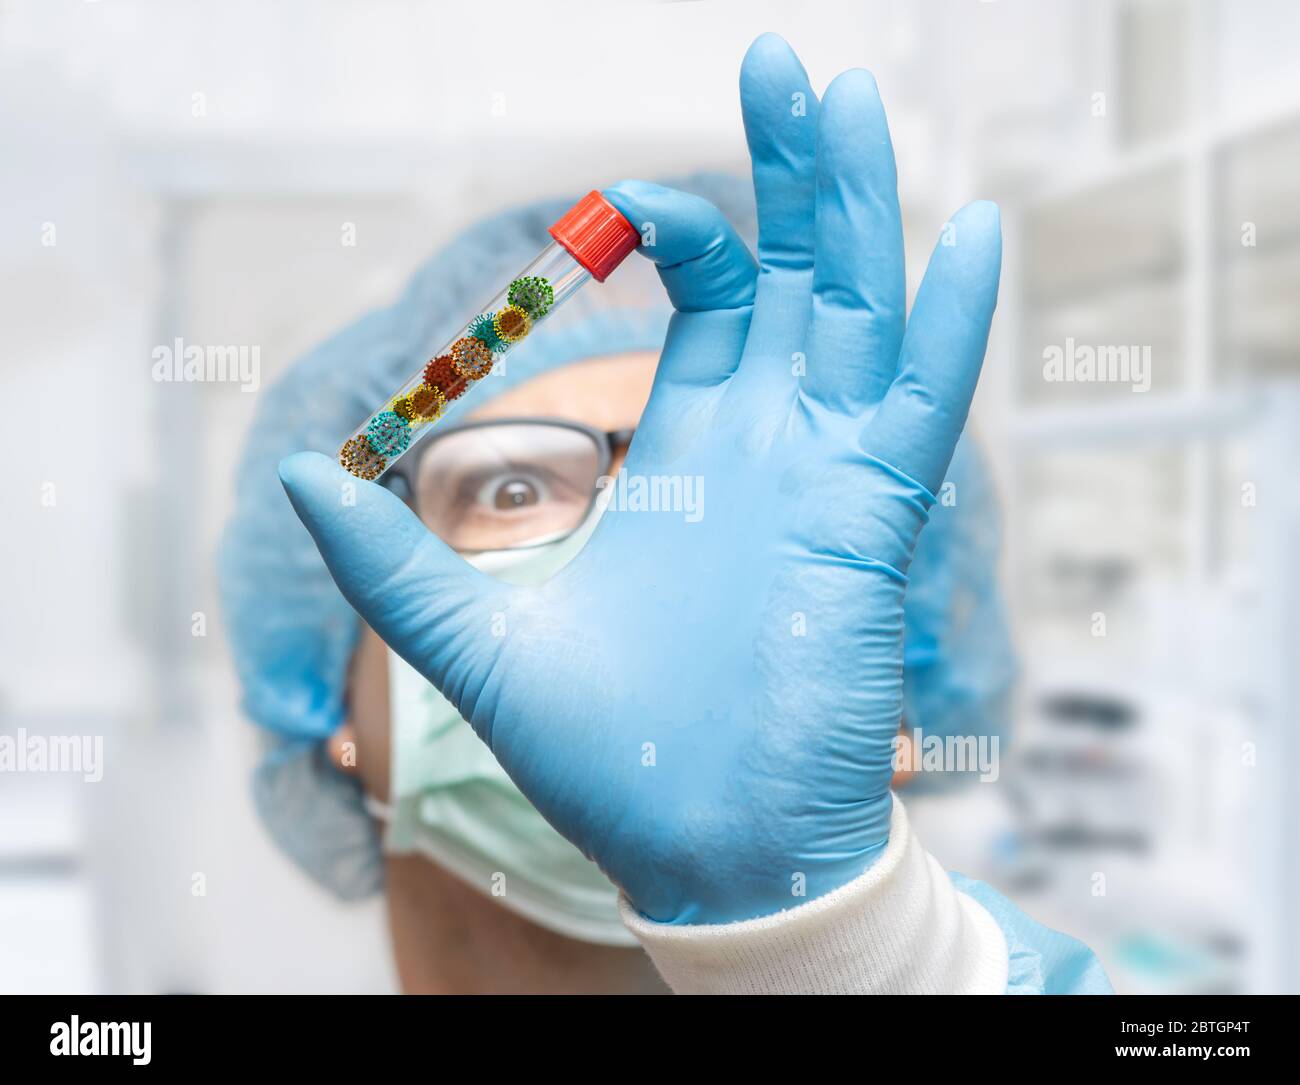 The doctor hold test tube with a collect of virus inside, focus on a hand, blurred face. Research of a dangerous microorganism. Stock Photo